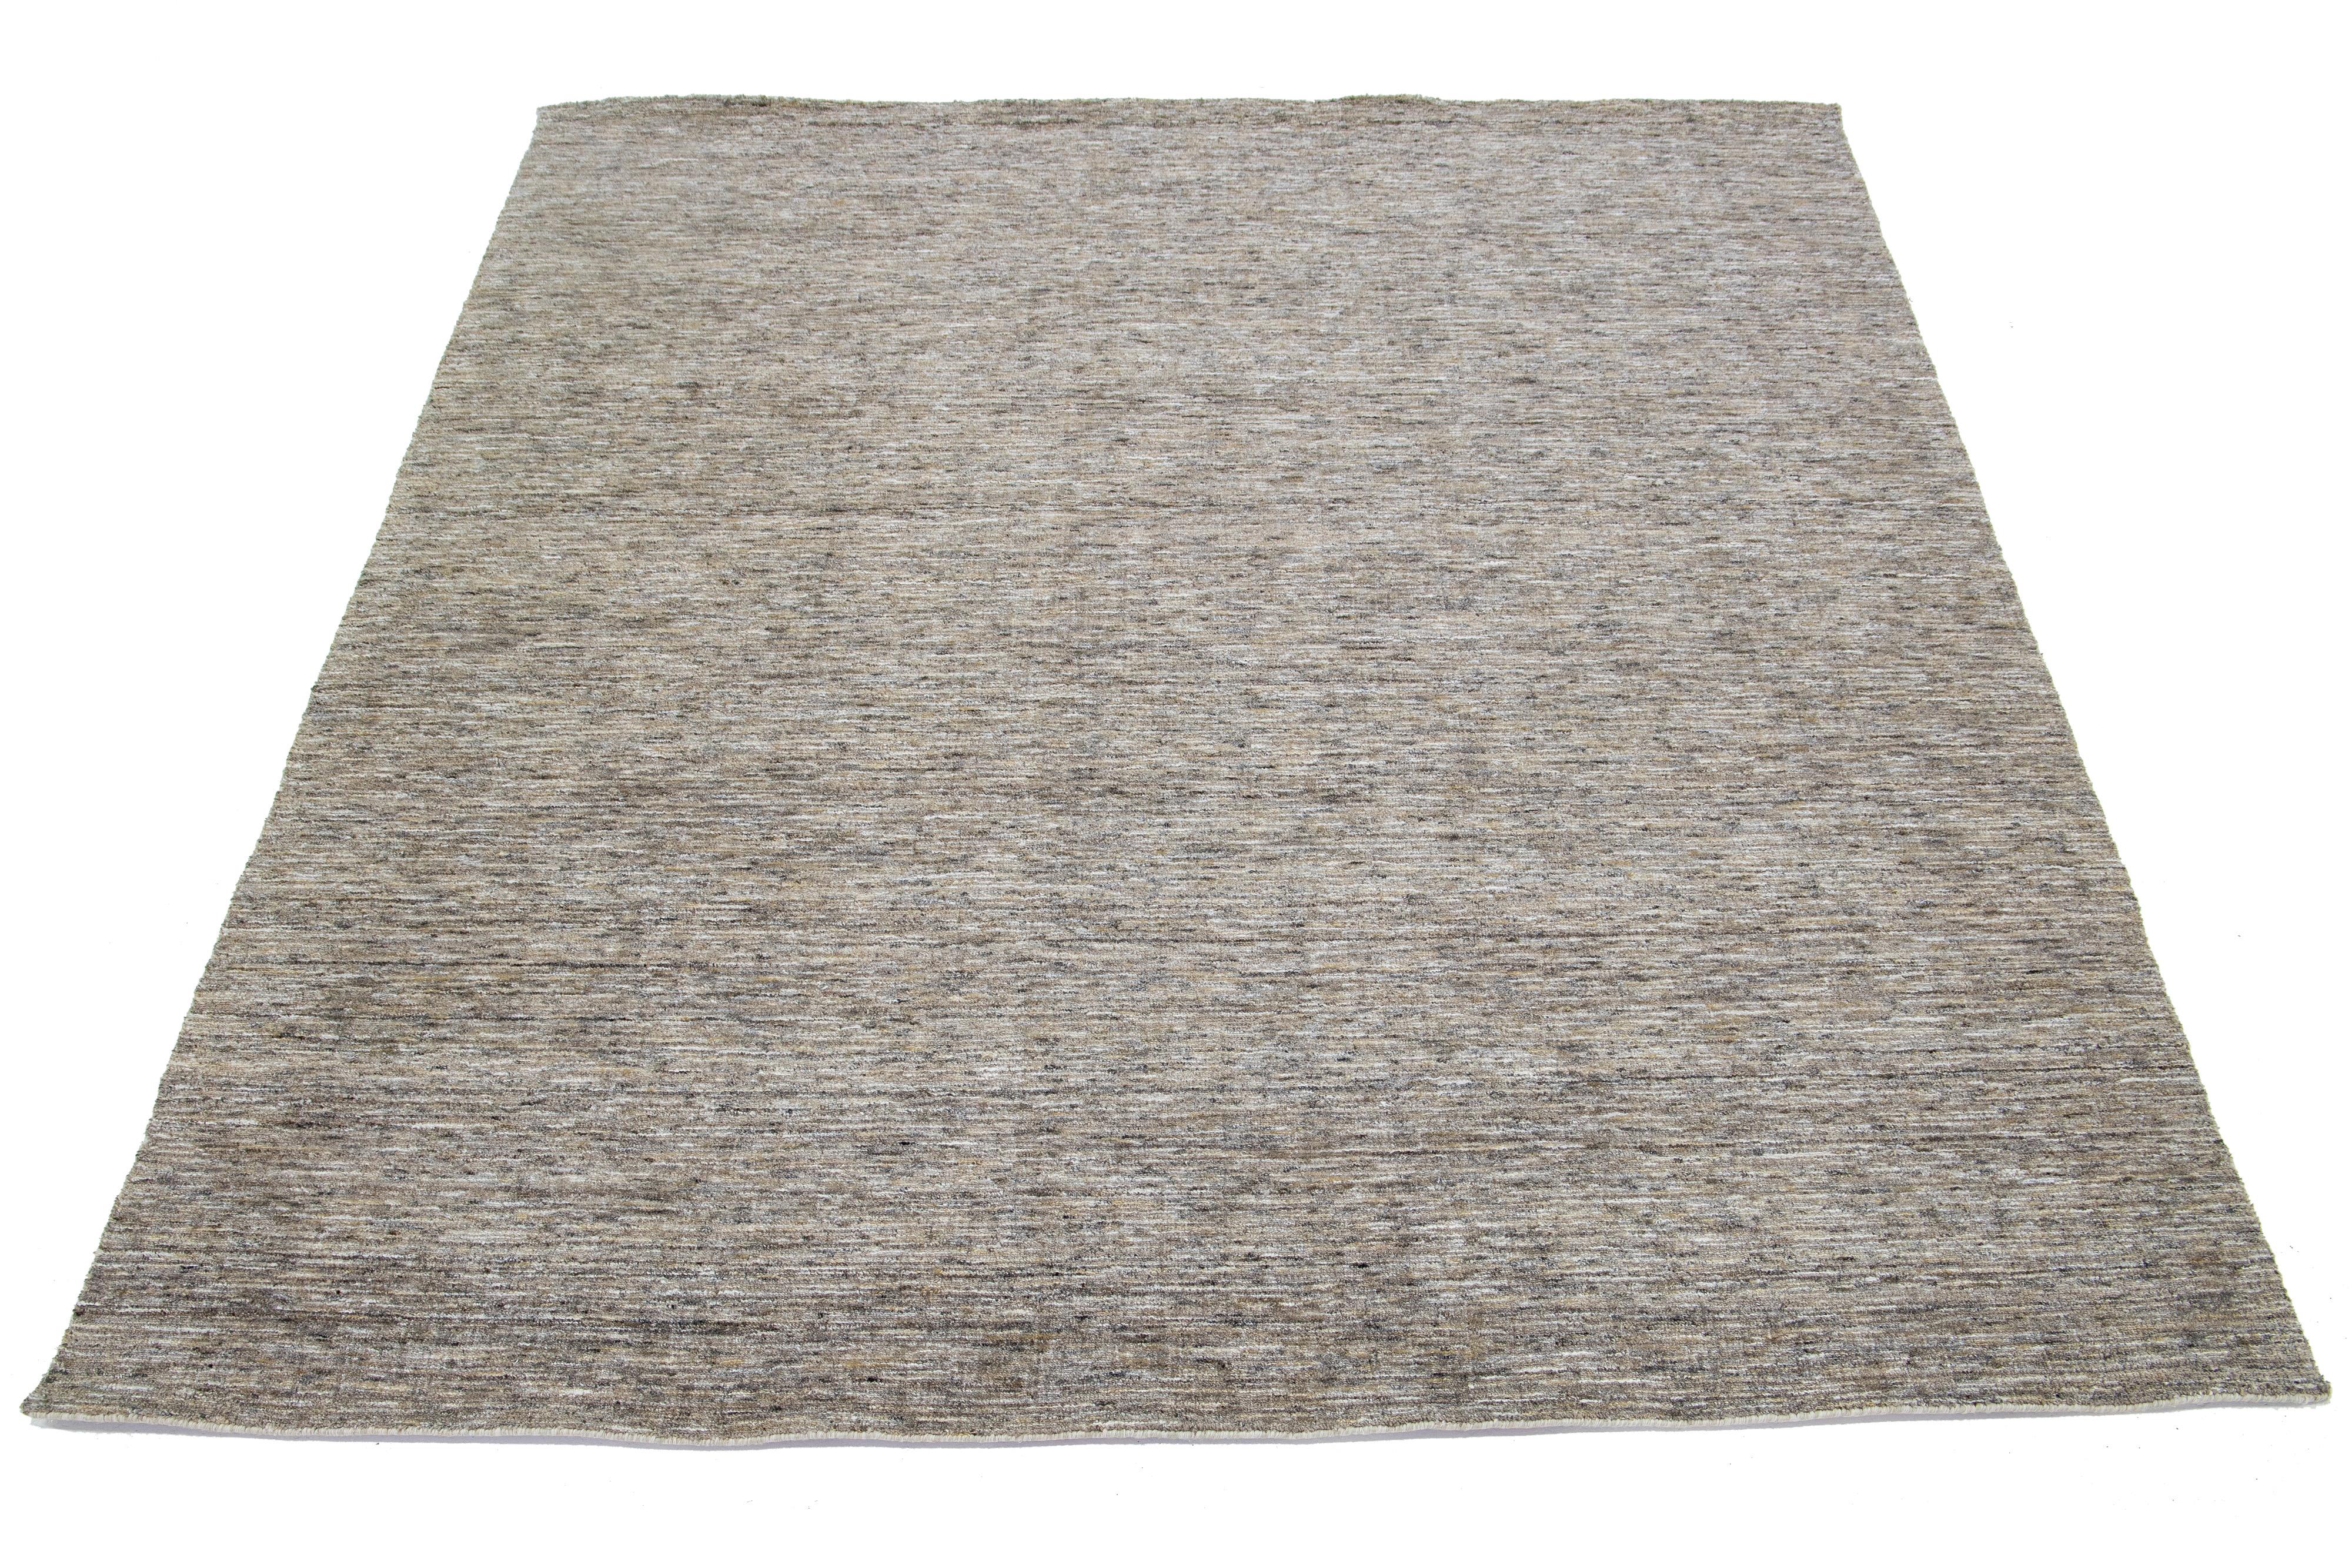 This beautiful modern hand-knotted wool rug has a taupe color field and a gorgeous texture Strié design. This piece is perfect for making a statement, and its luxurious texture will make a lasting impression.

This rug measures 7'9